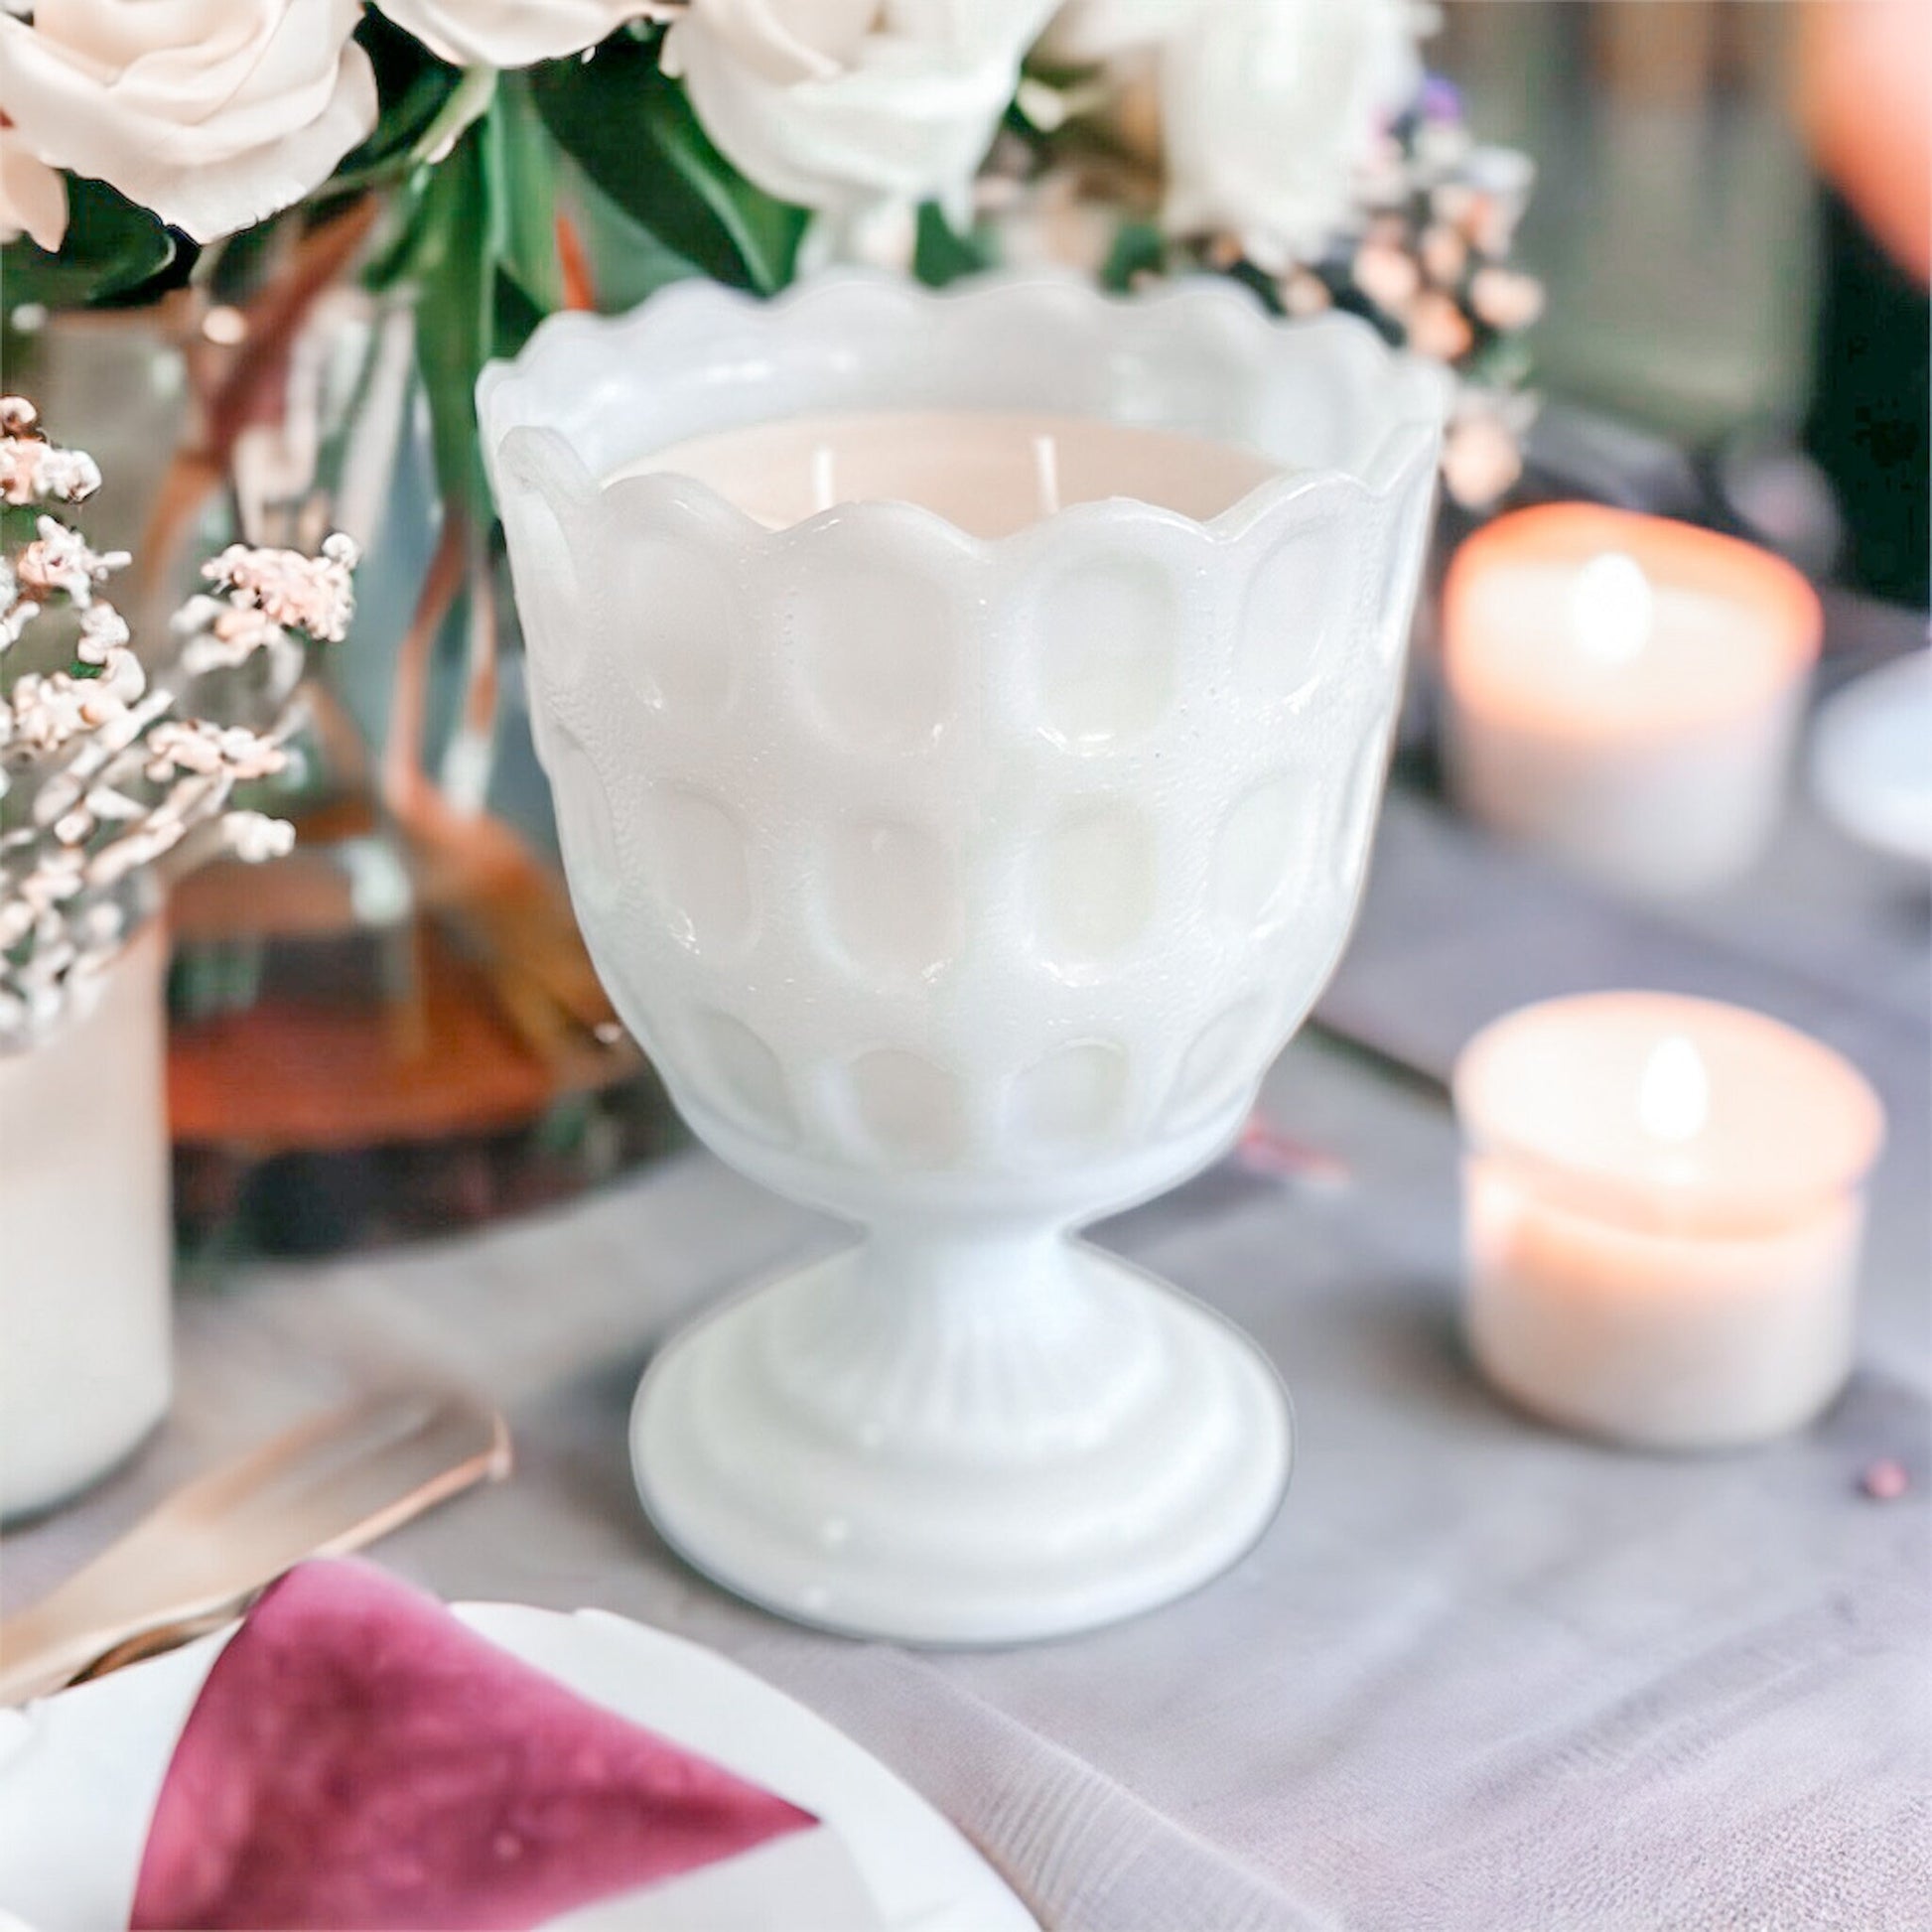 Soy Wax Candle in Vintage Milk Glass Vase